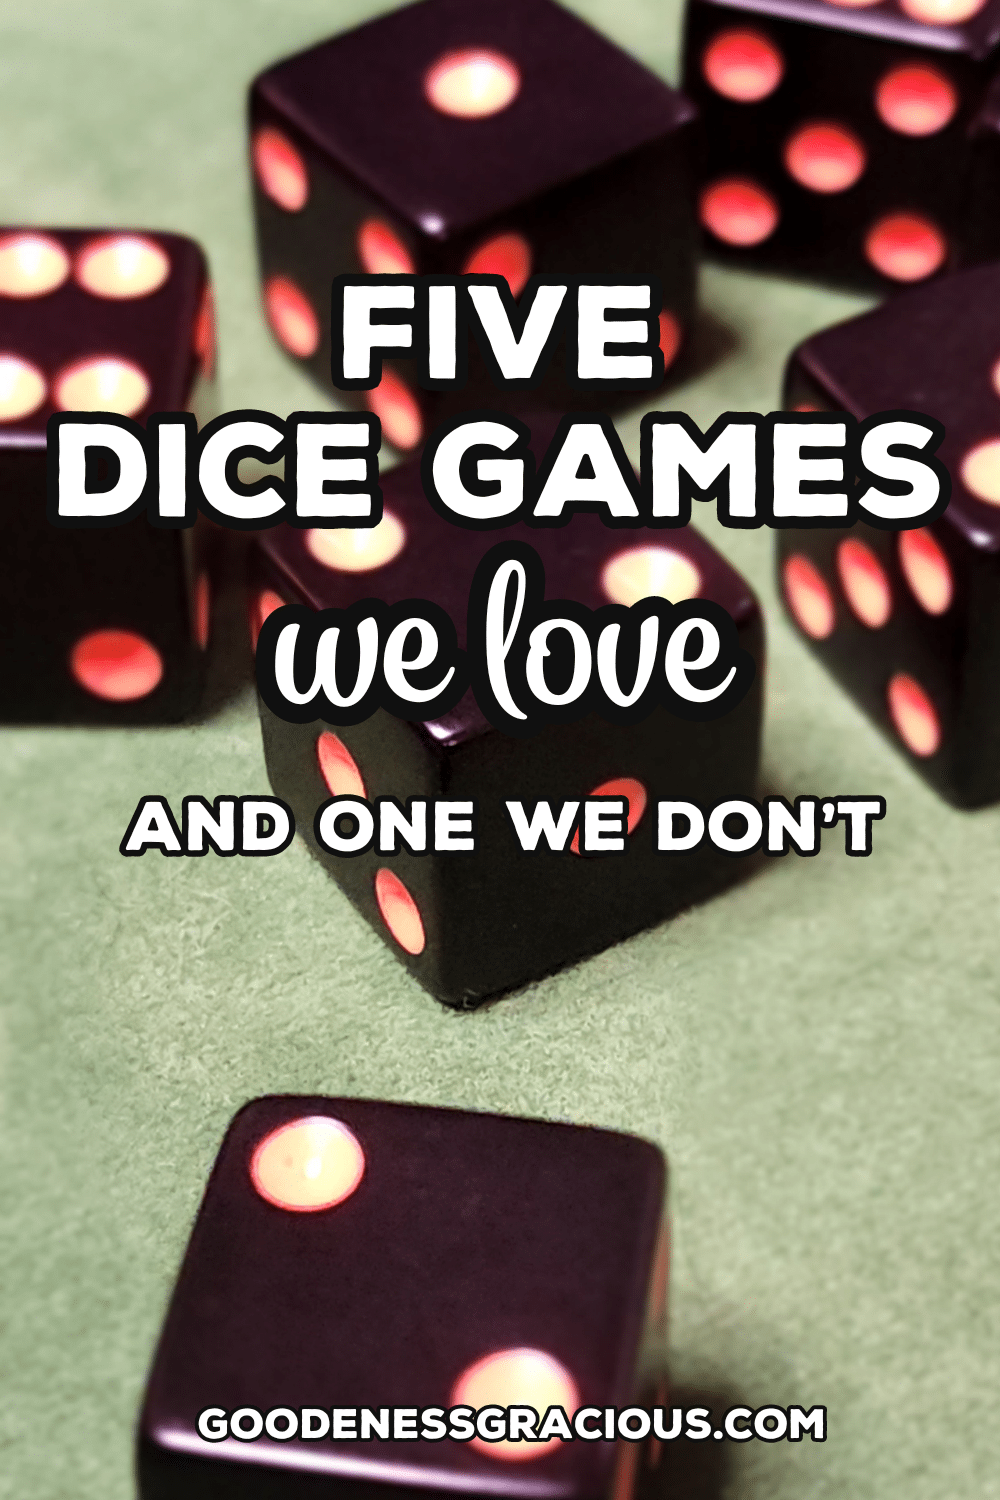 Looking for new games for Family Game Night? Here are Five Dice Games We Love (and One We Don't!  via @crisgoode